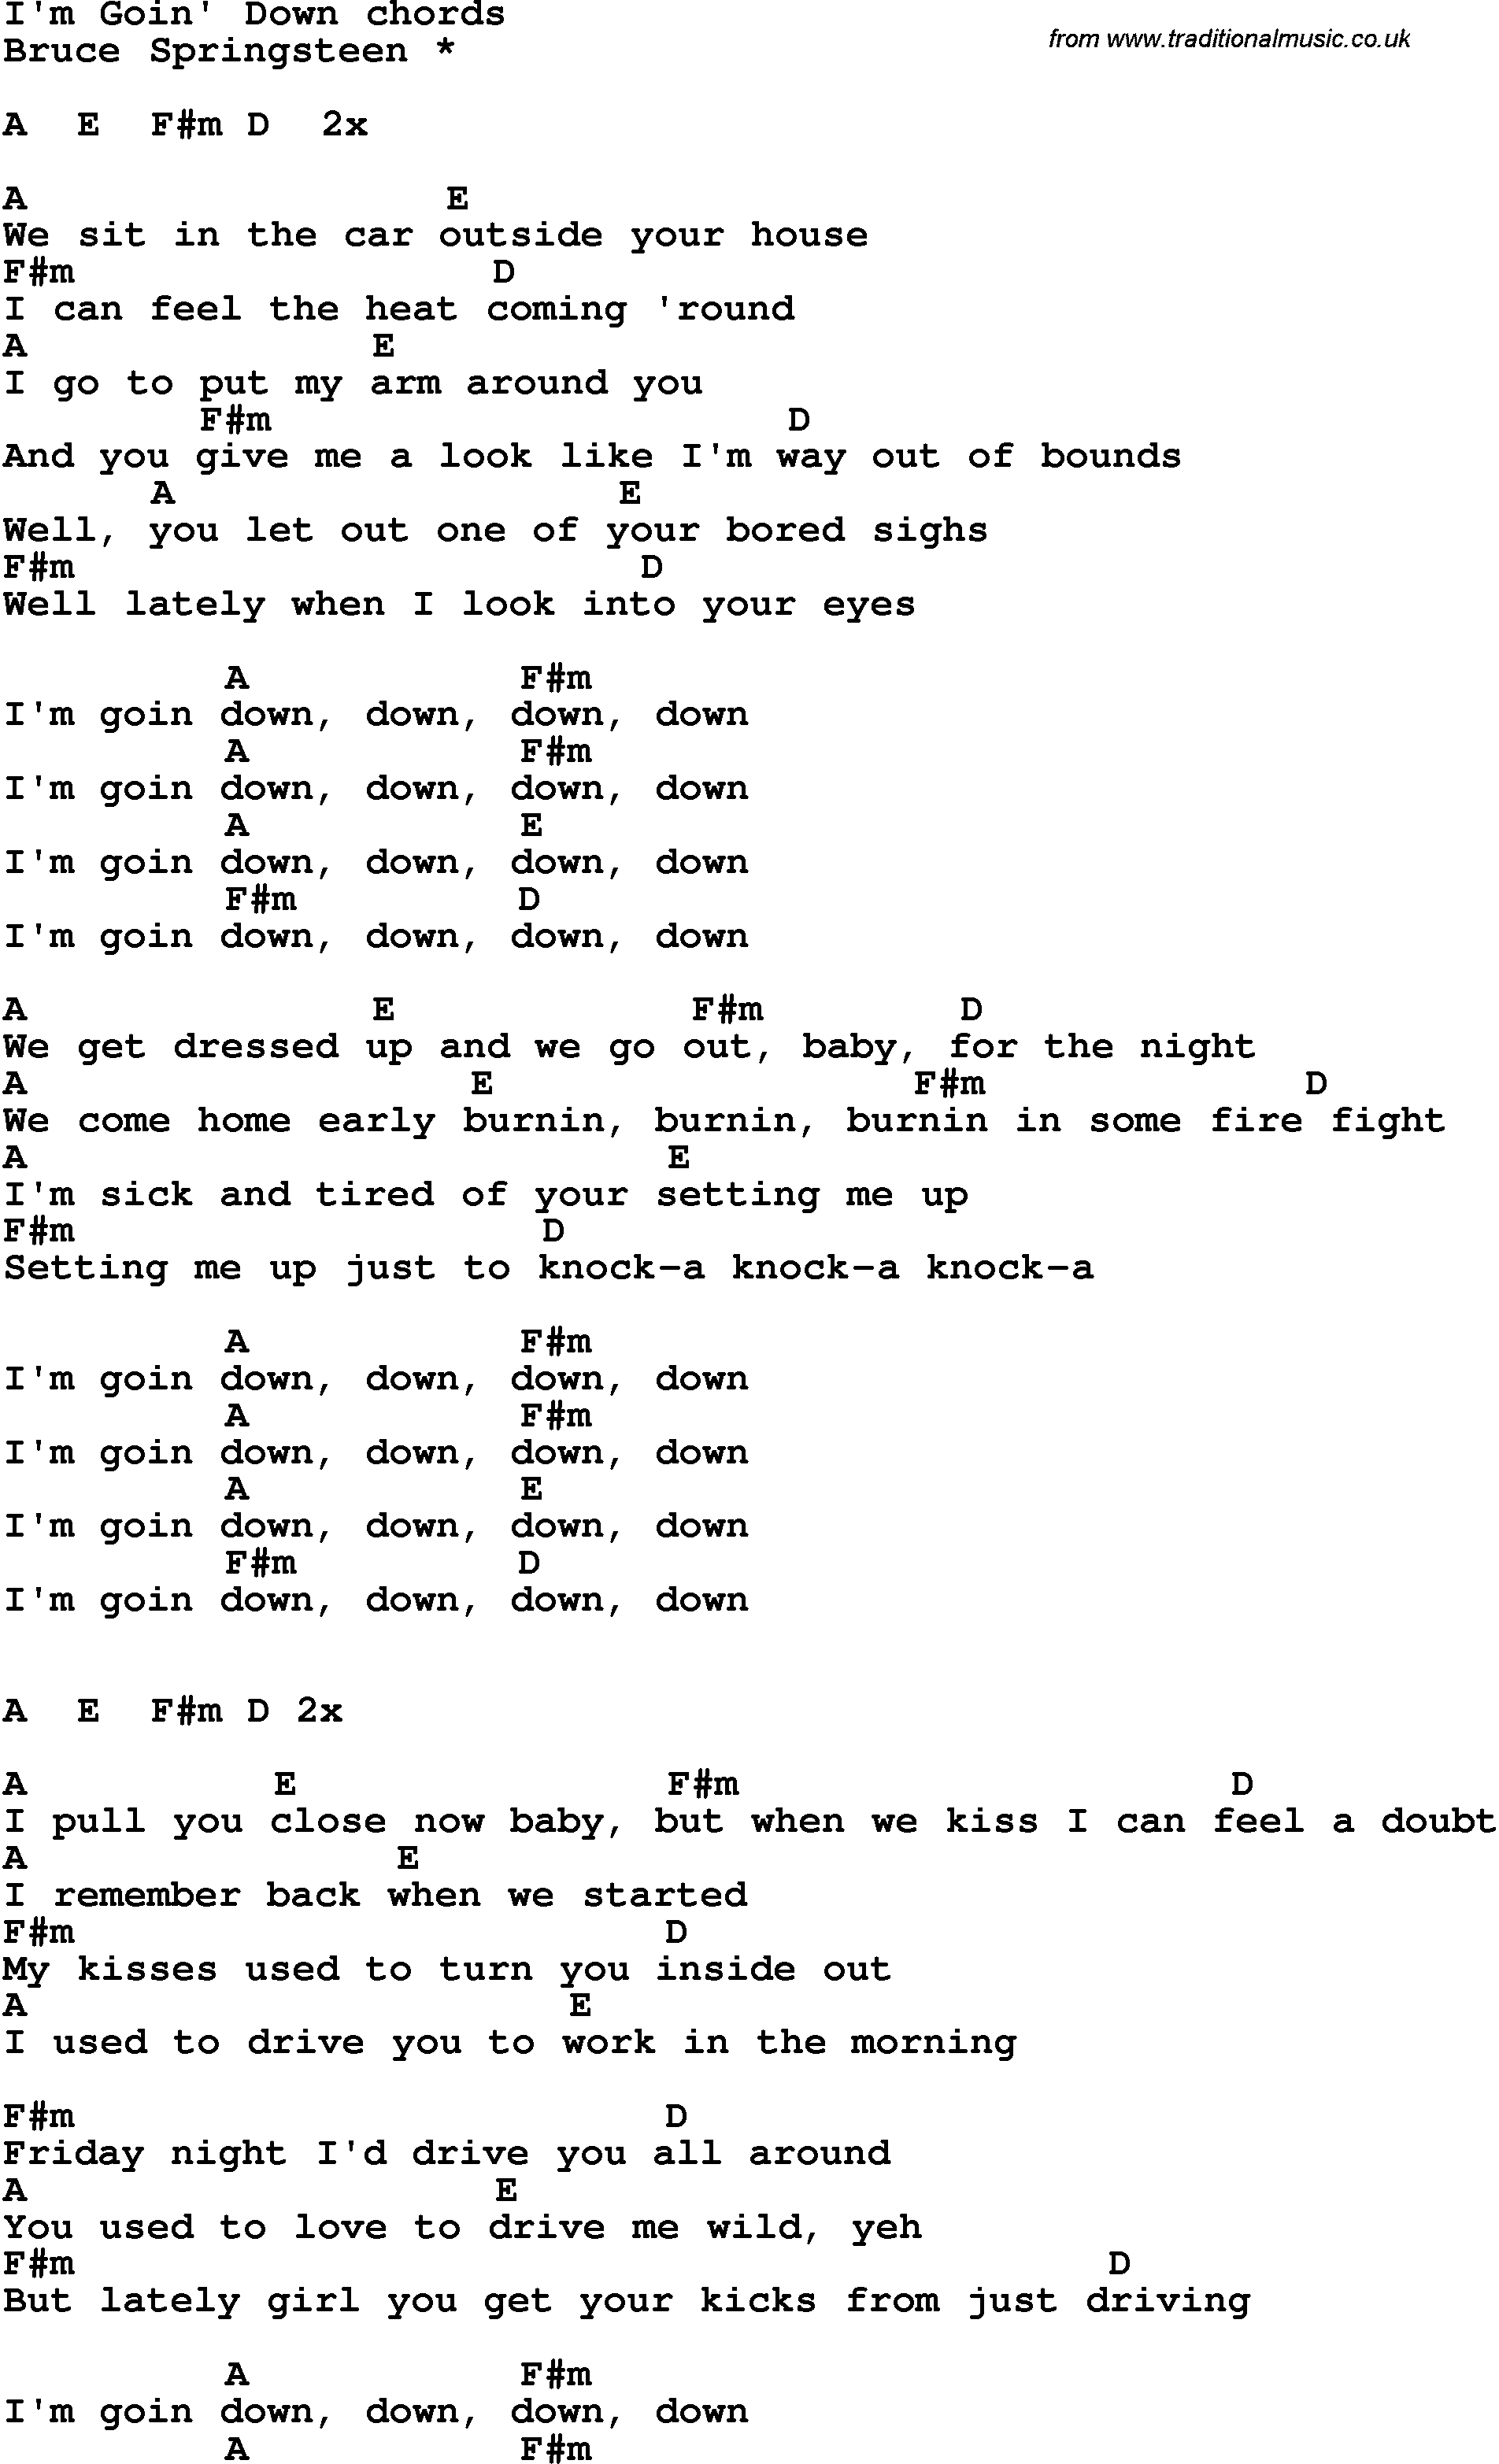 Song Lyrics with guitar chords for I'm Goin' Down